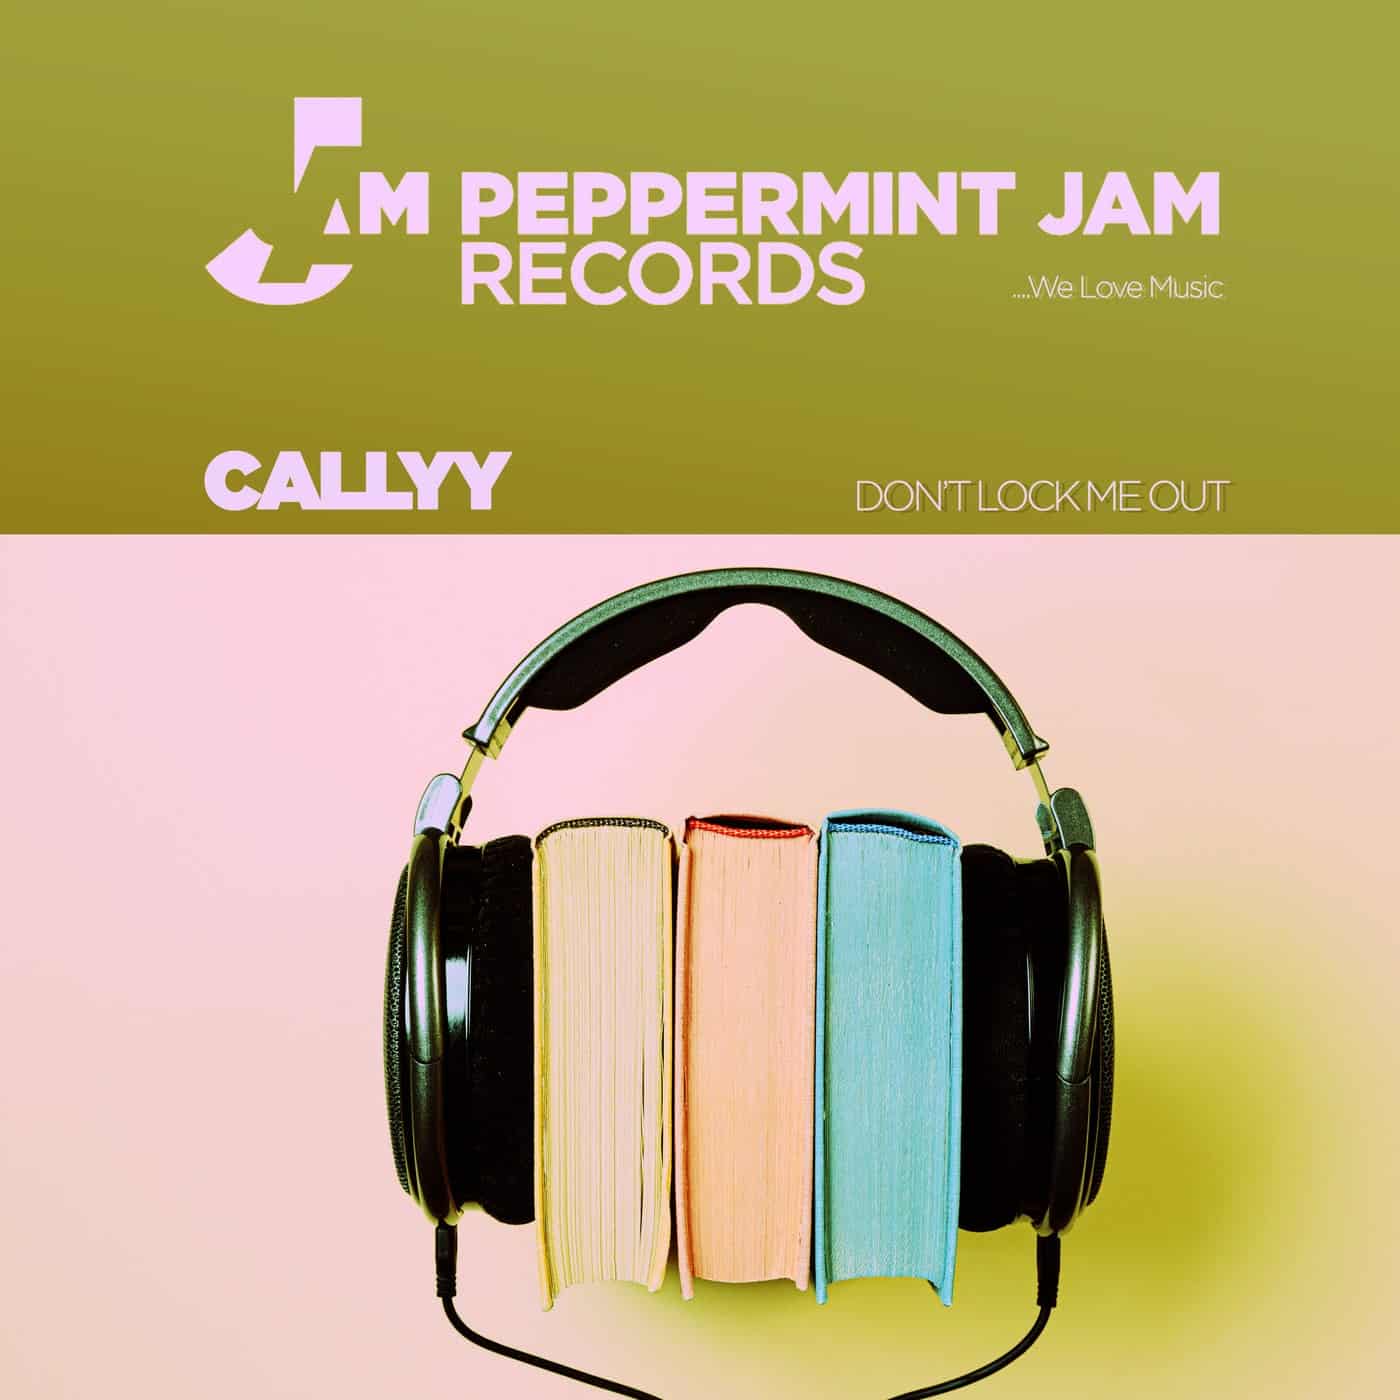 image cover: Don't Lock Me Out by Callyy on Peppermint Jam